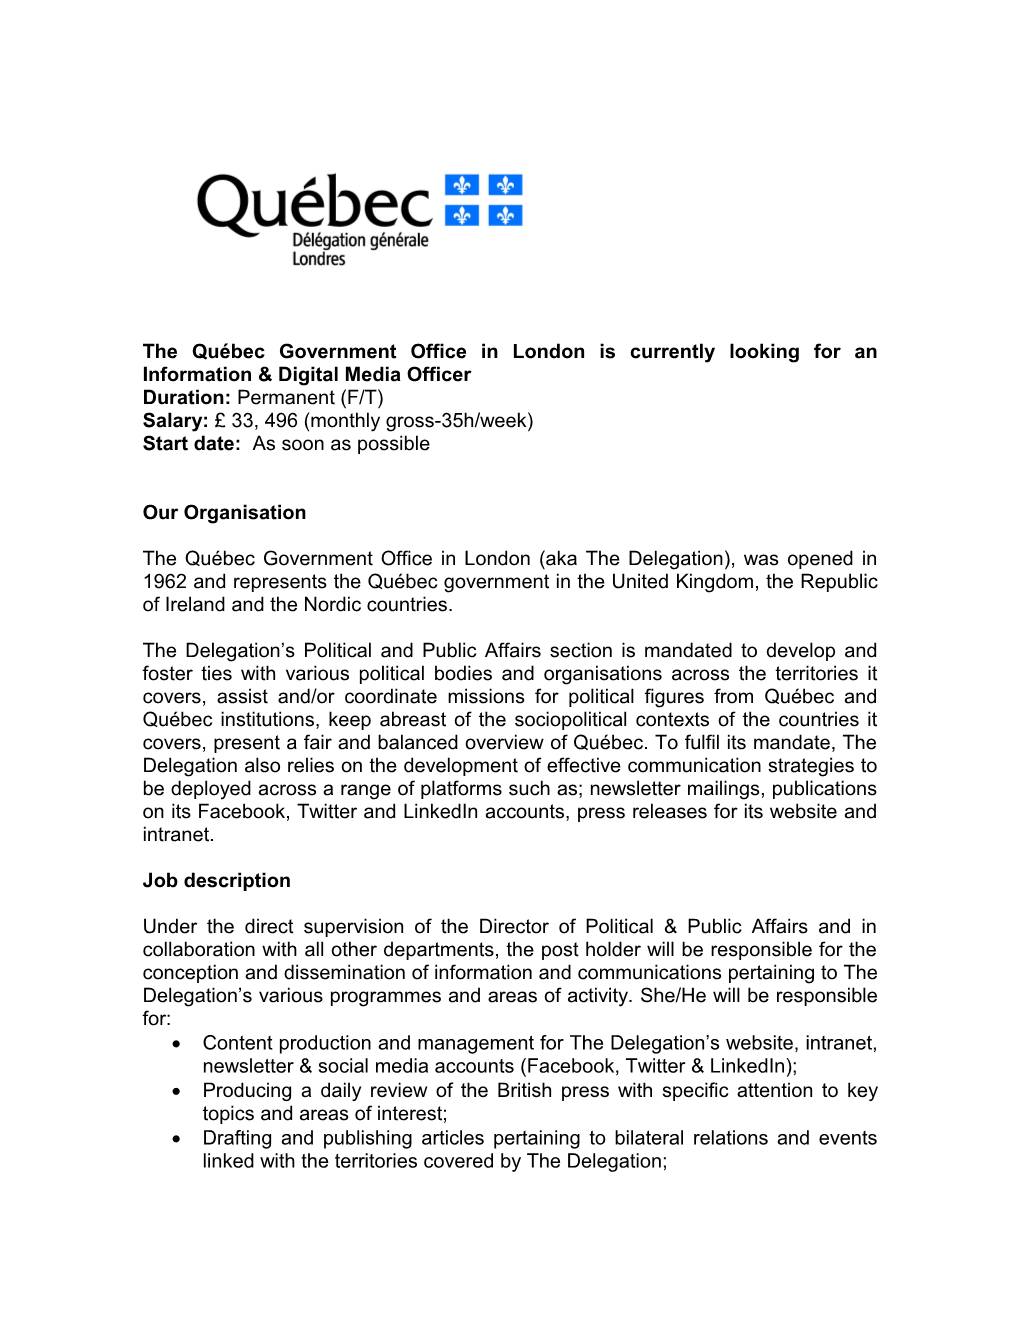 The Québec Government Office in London Is Currently Looking for an Information & Digital